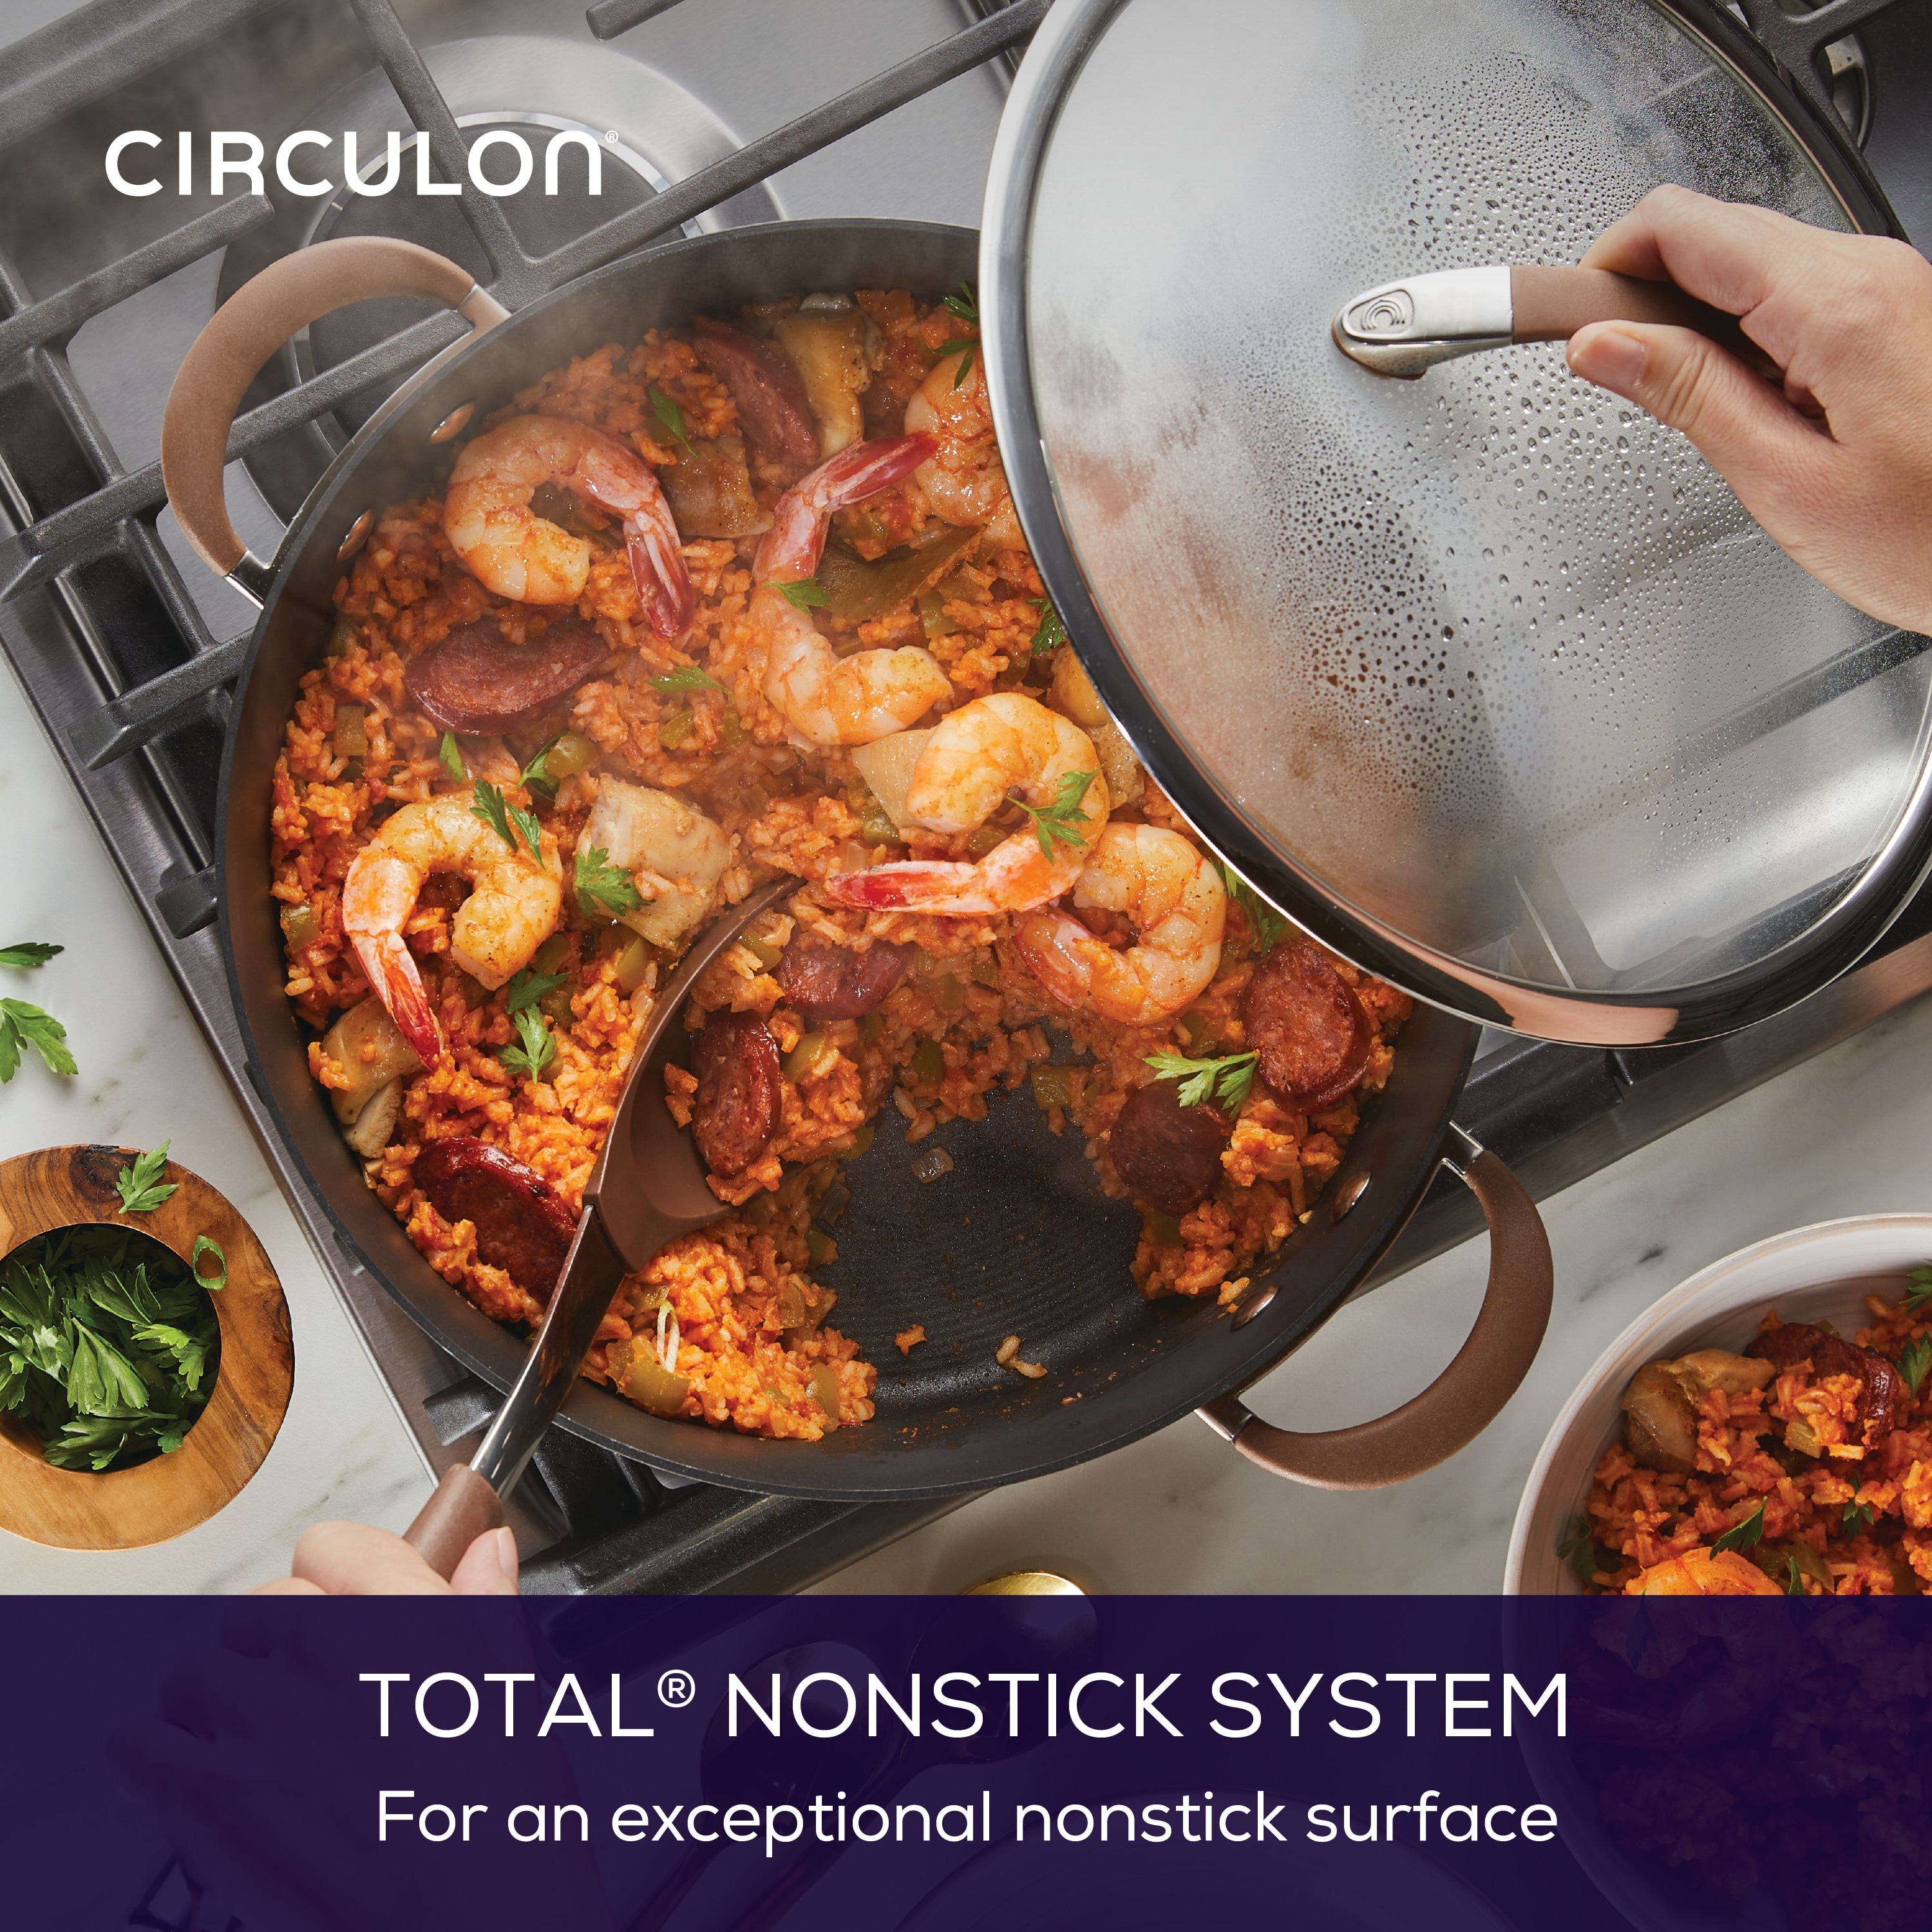 https://ak1.ostkcdn.com/images/products/is/images/direct/b141030d4528355b17ea4eb3a32f442579a1b3f7/Circulon-Symmetry-Hard-Anodized-Nonstick-Induction-Dutch-Oven-with-Lid%2C-7-Quart%2C-Chocolate.jpg